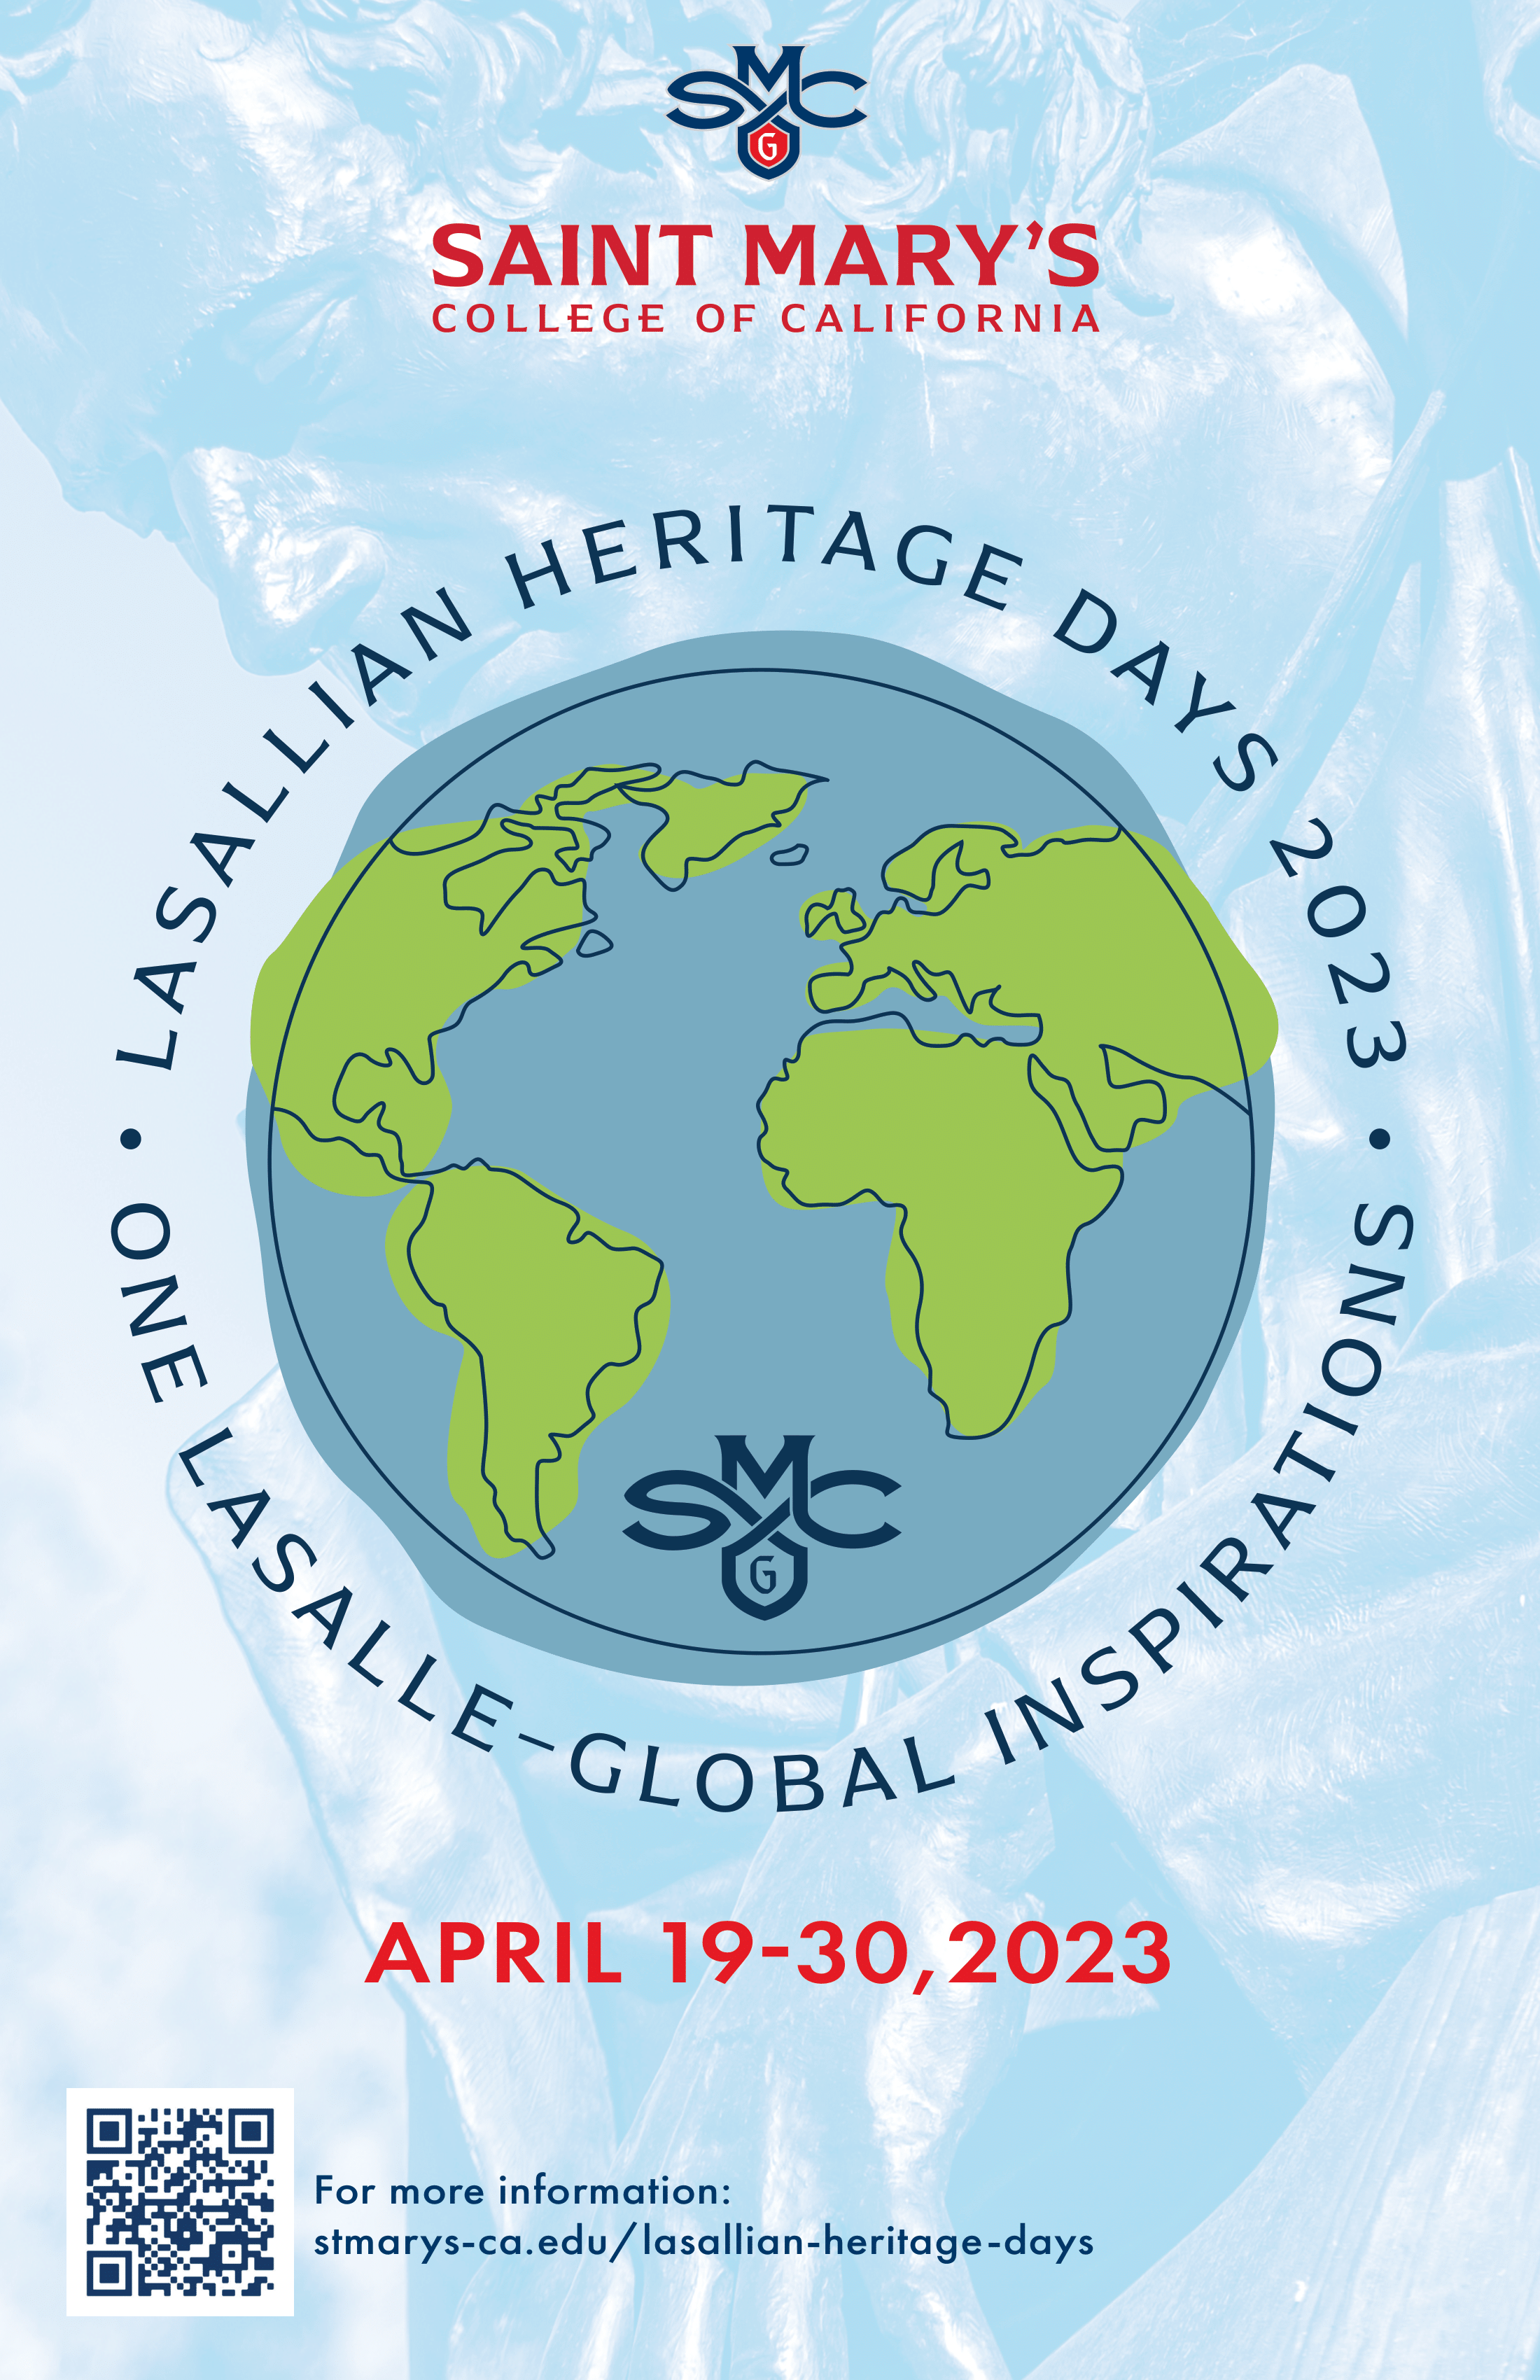 Image of a hand drawn globe against a light blue background with a transparent image of St. Jean Baptist de Lasalle and the words Lasallian Heritage Days 2023, One LaSalle-Global-Inspirations, April 19-30, 2023